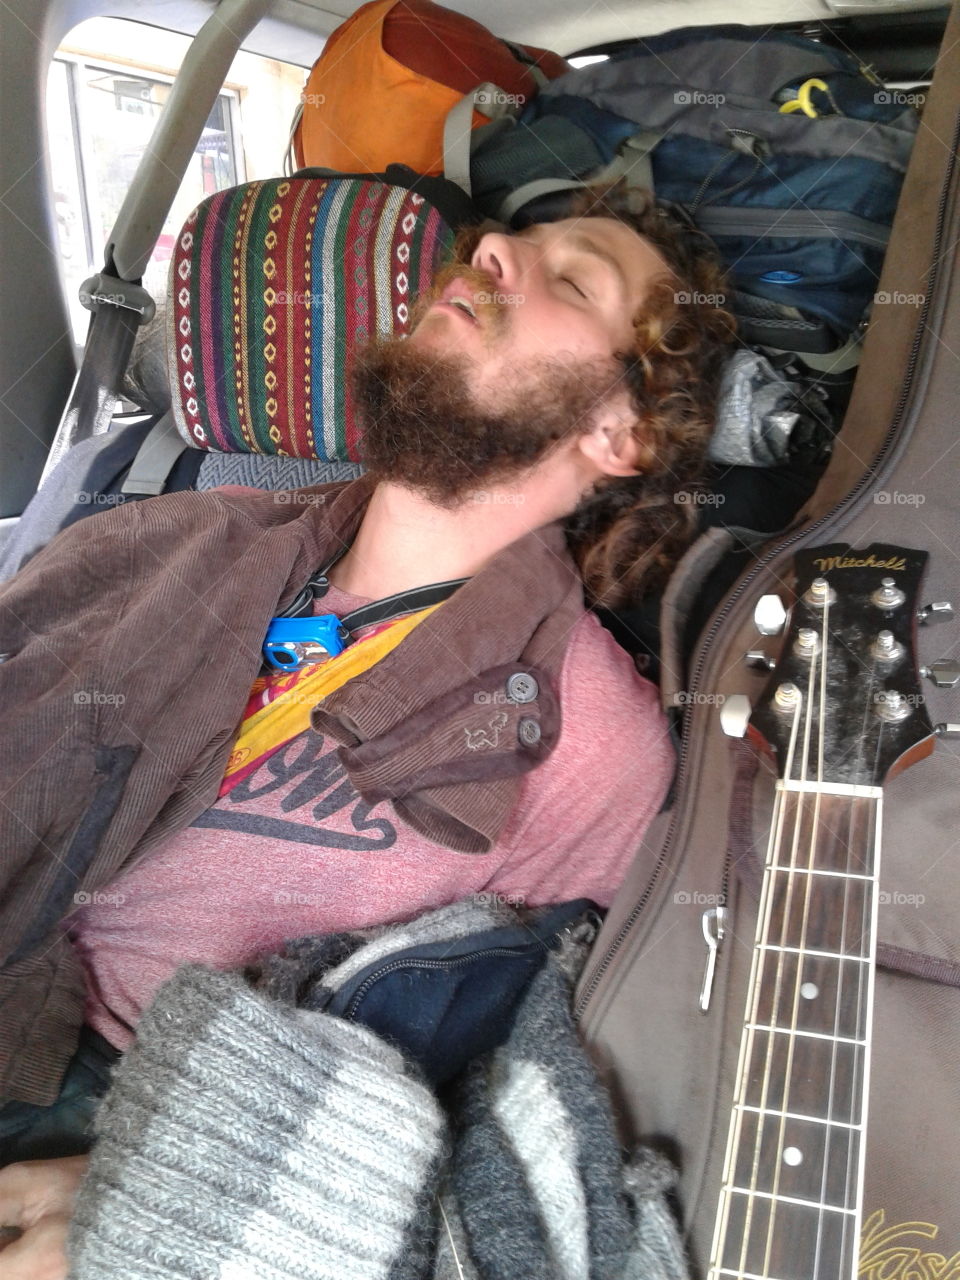 Traveler passed out in the backseat.